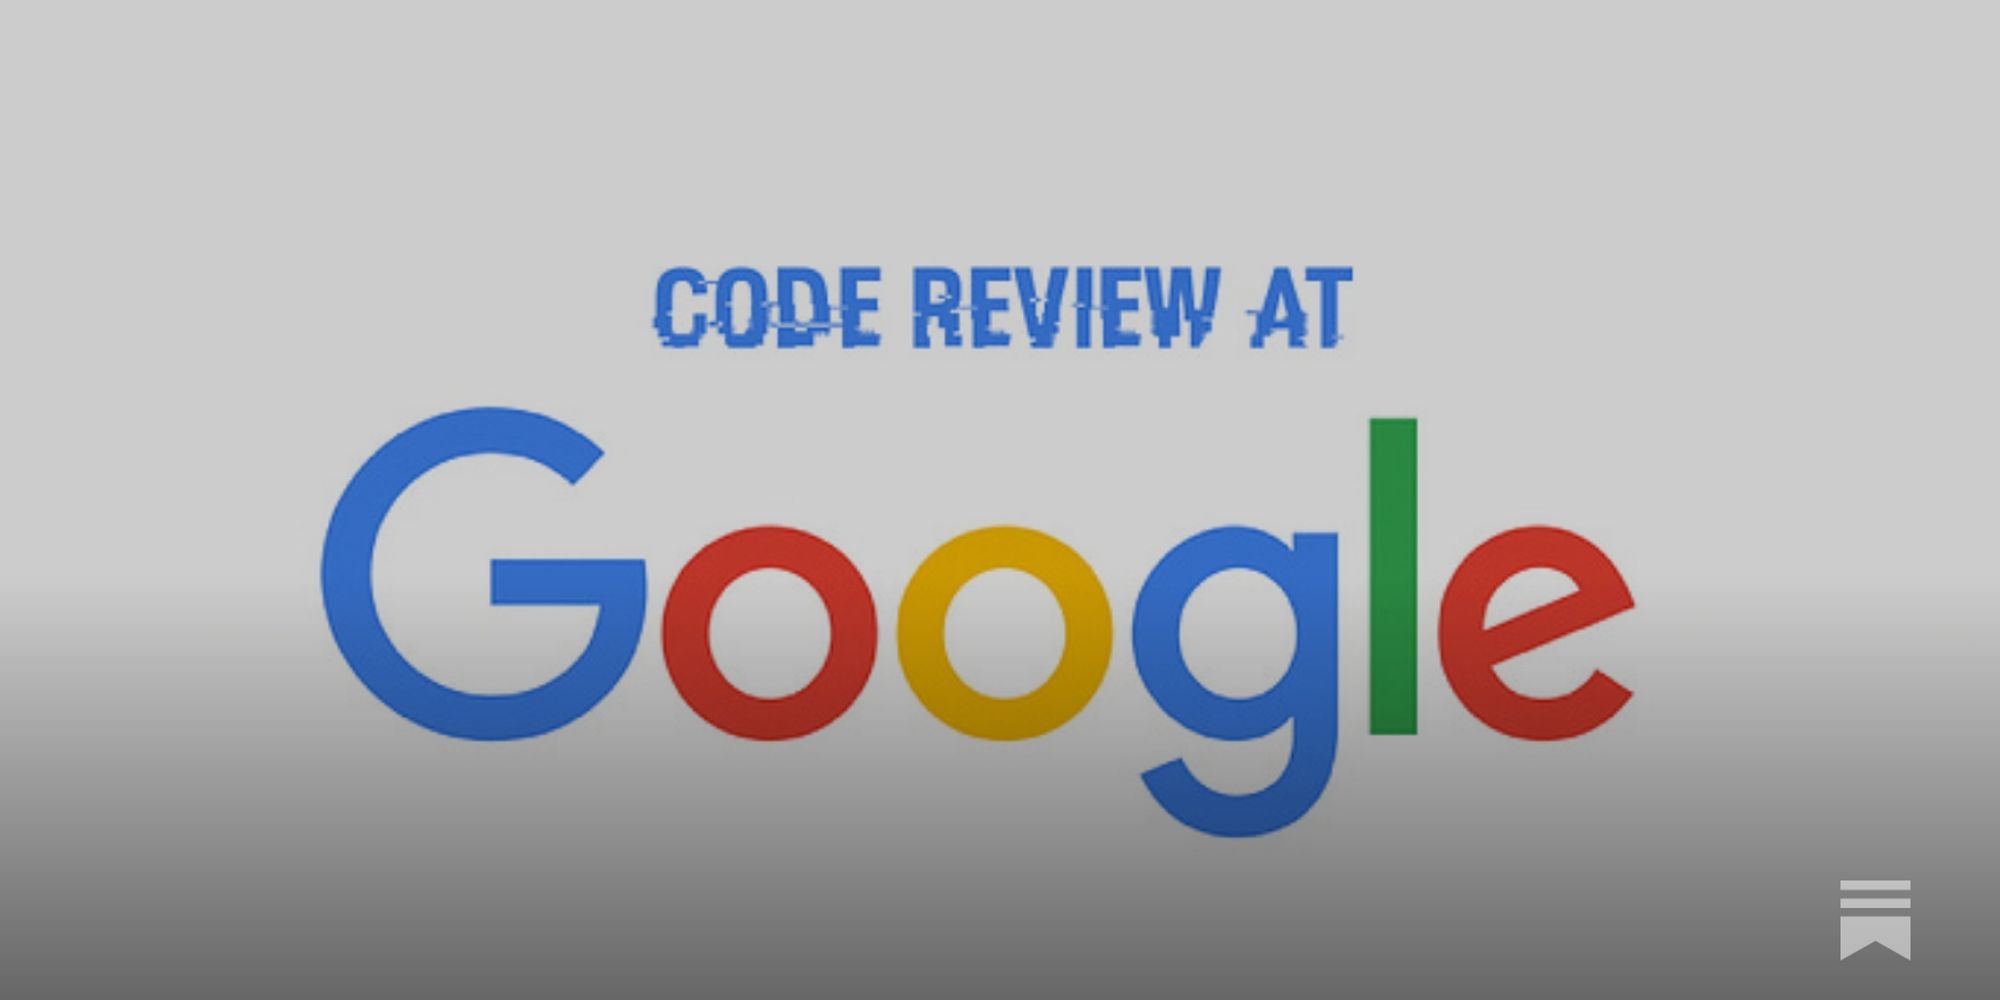 How Google takes the pain out of code reviews, with 97% dev satisfaction